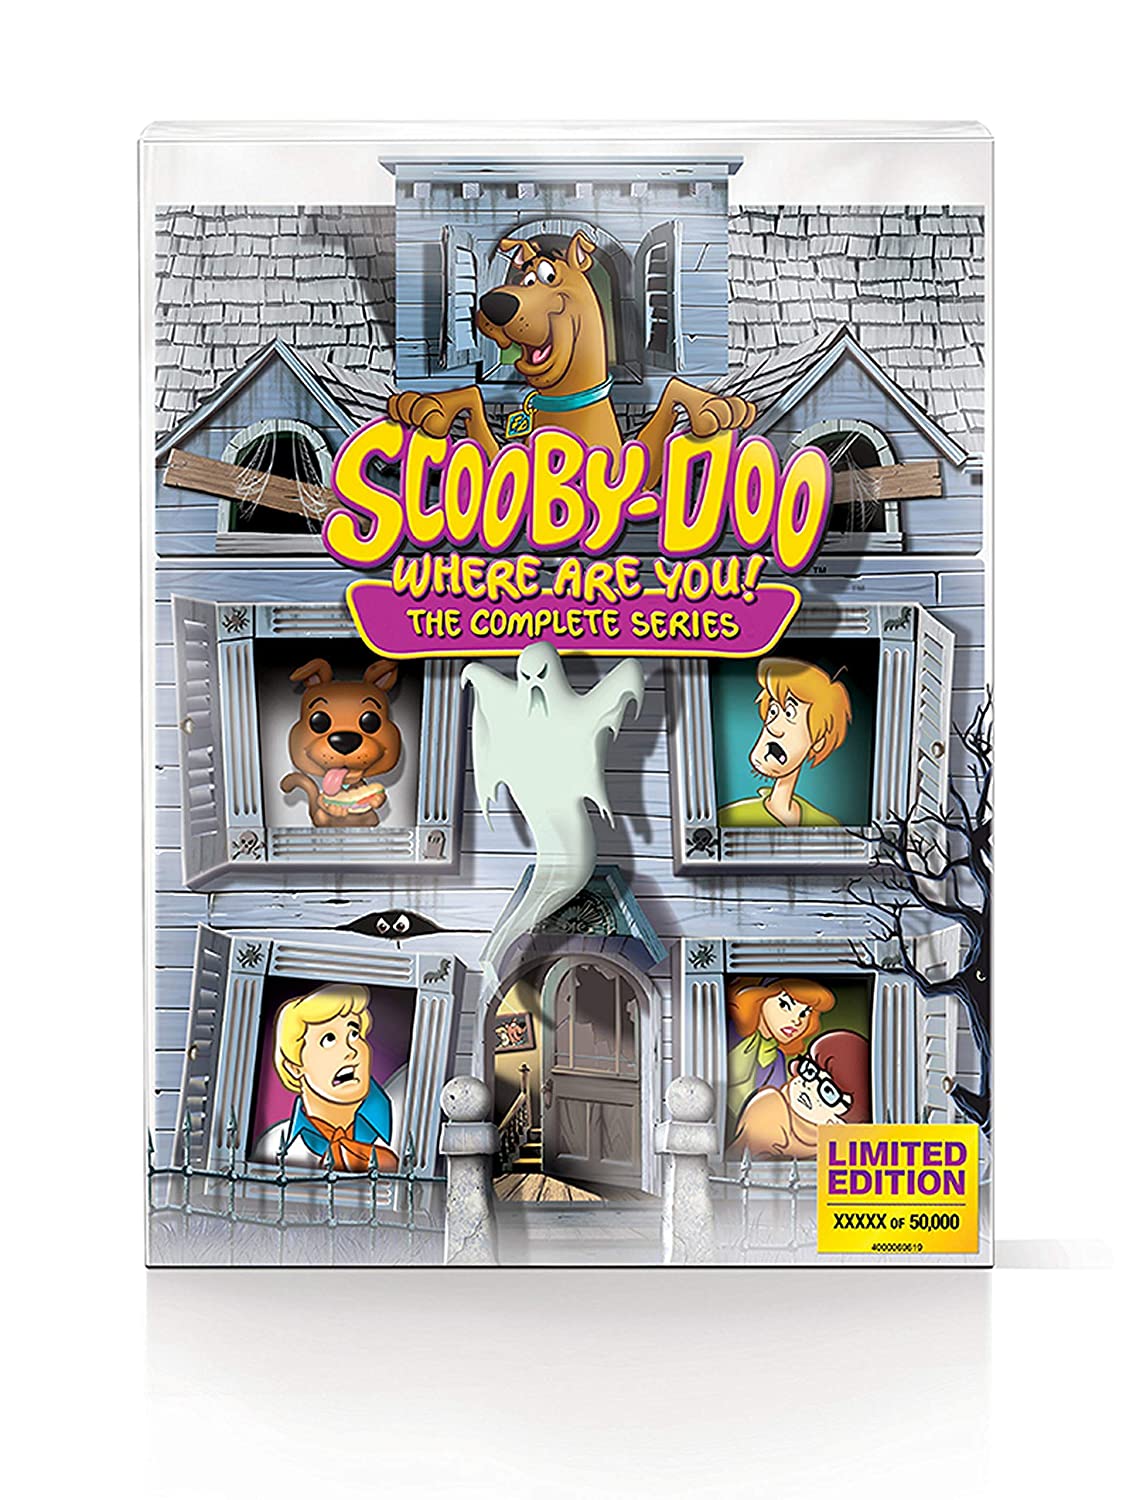 Scooby-Doo, Where Are You!: The Complete Series Limited Edition 50th Ann Mystery Mansion (Blu-ray + Digital) $34.97, Bugs Bunny 80th Anniversary Collection $39.99 & More + FS